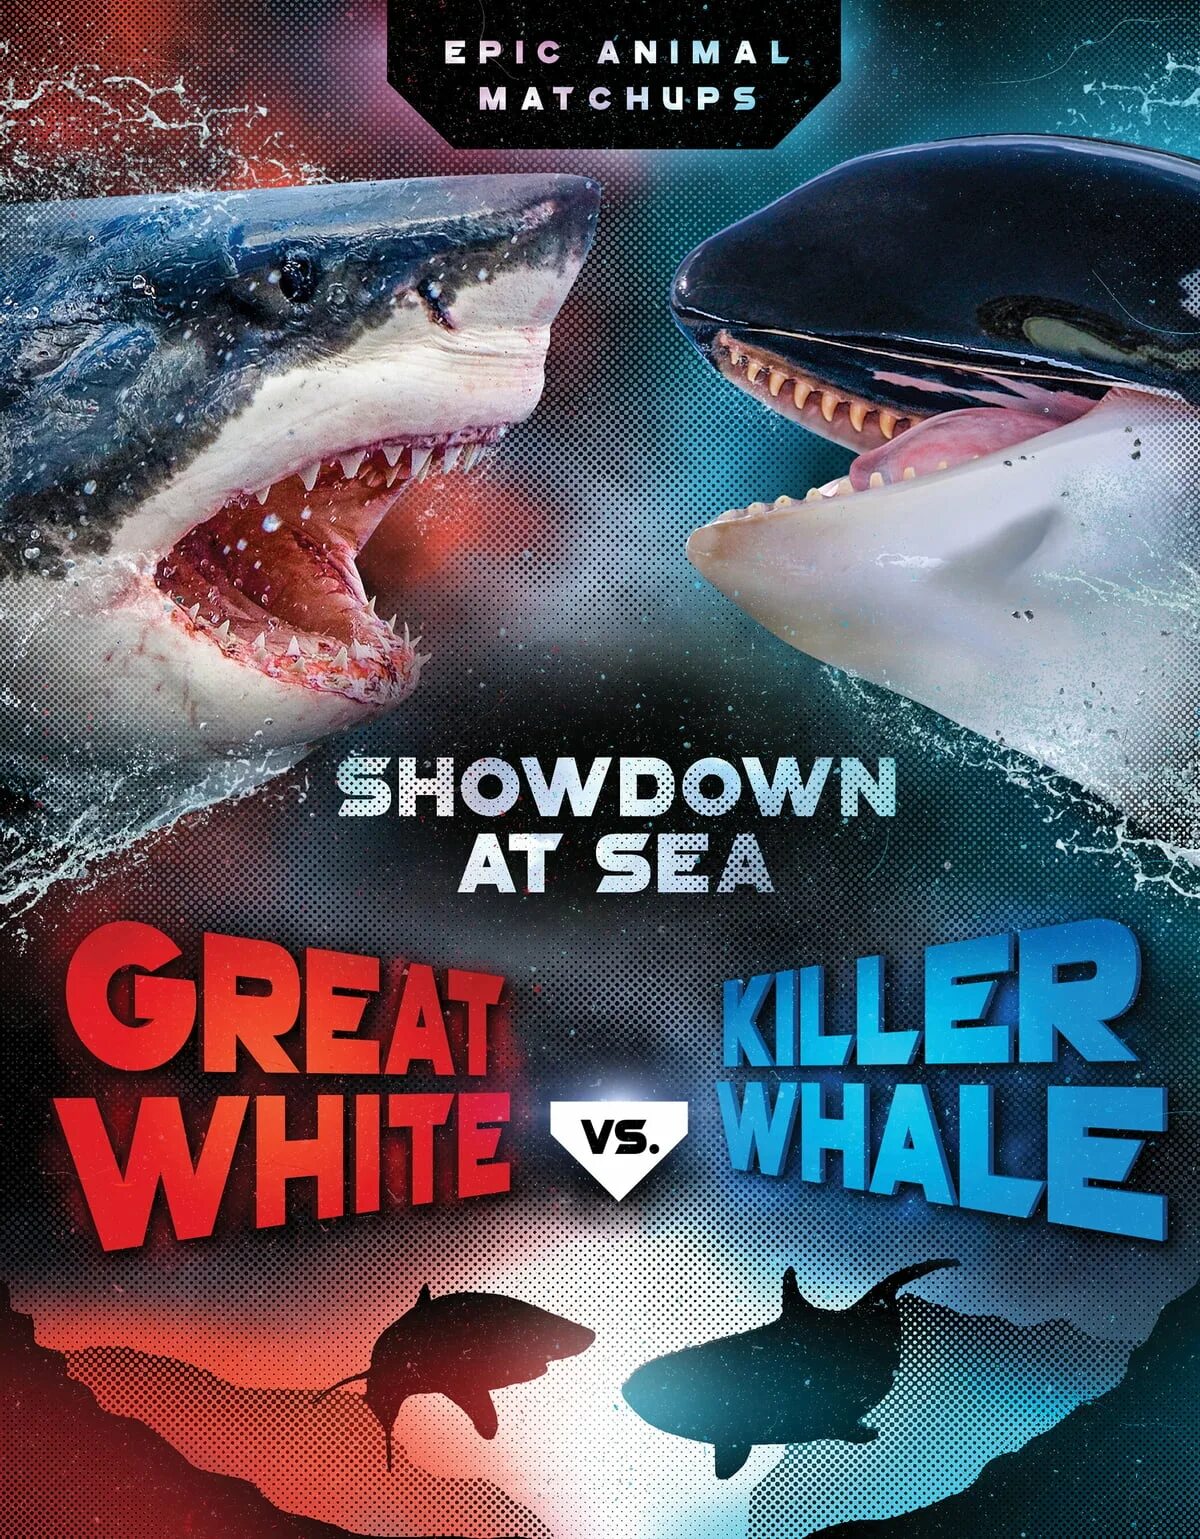 Epic animals. Killer Whale and great White Shark. Epic animals игрушки. Killer Whale vs jaws.